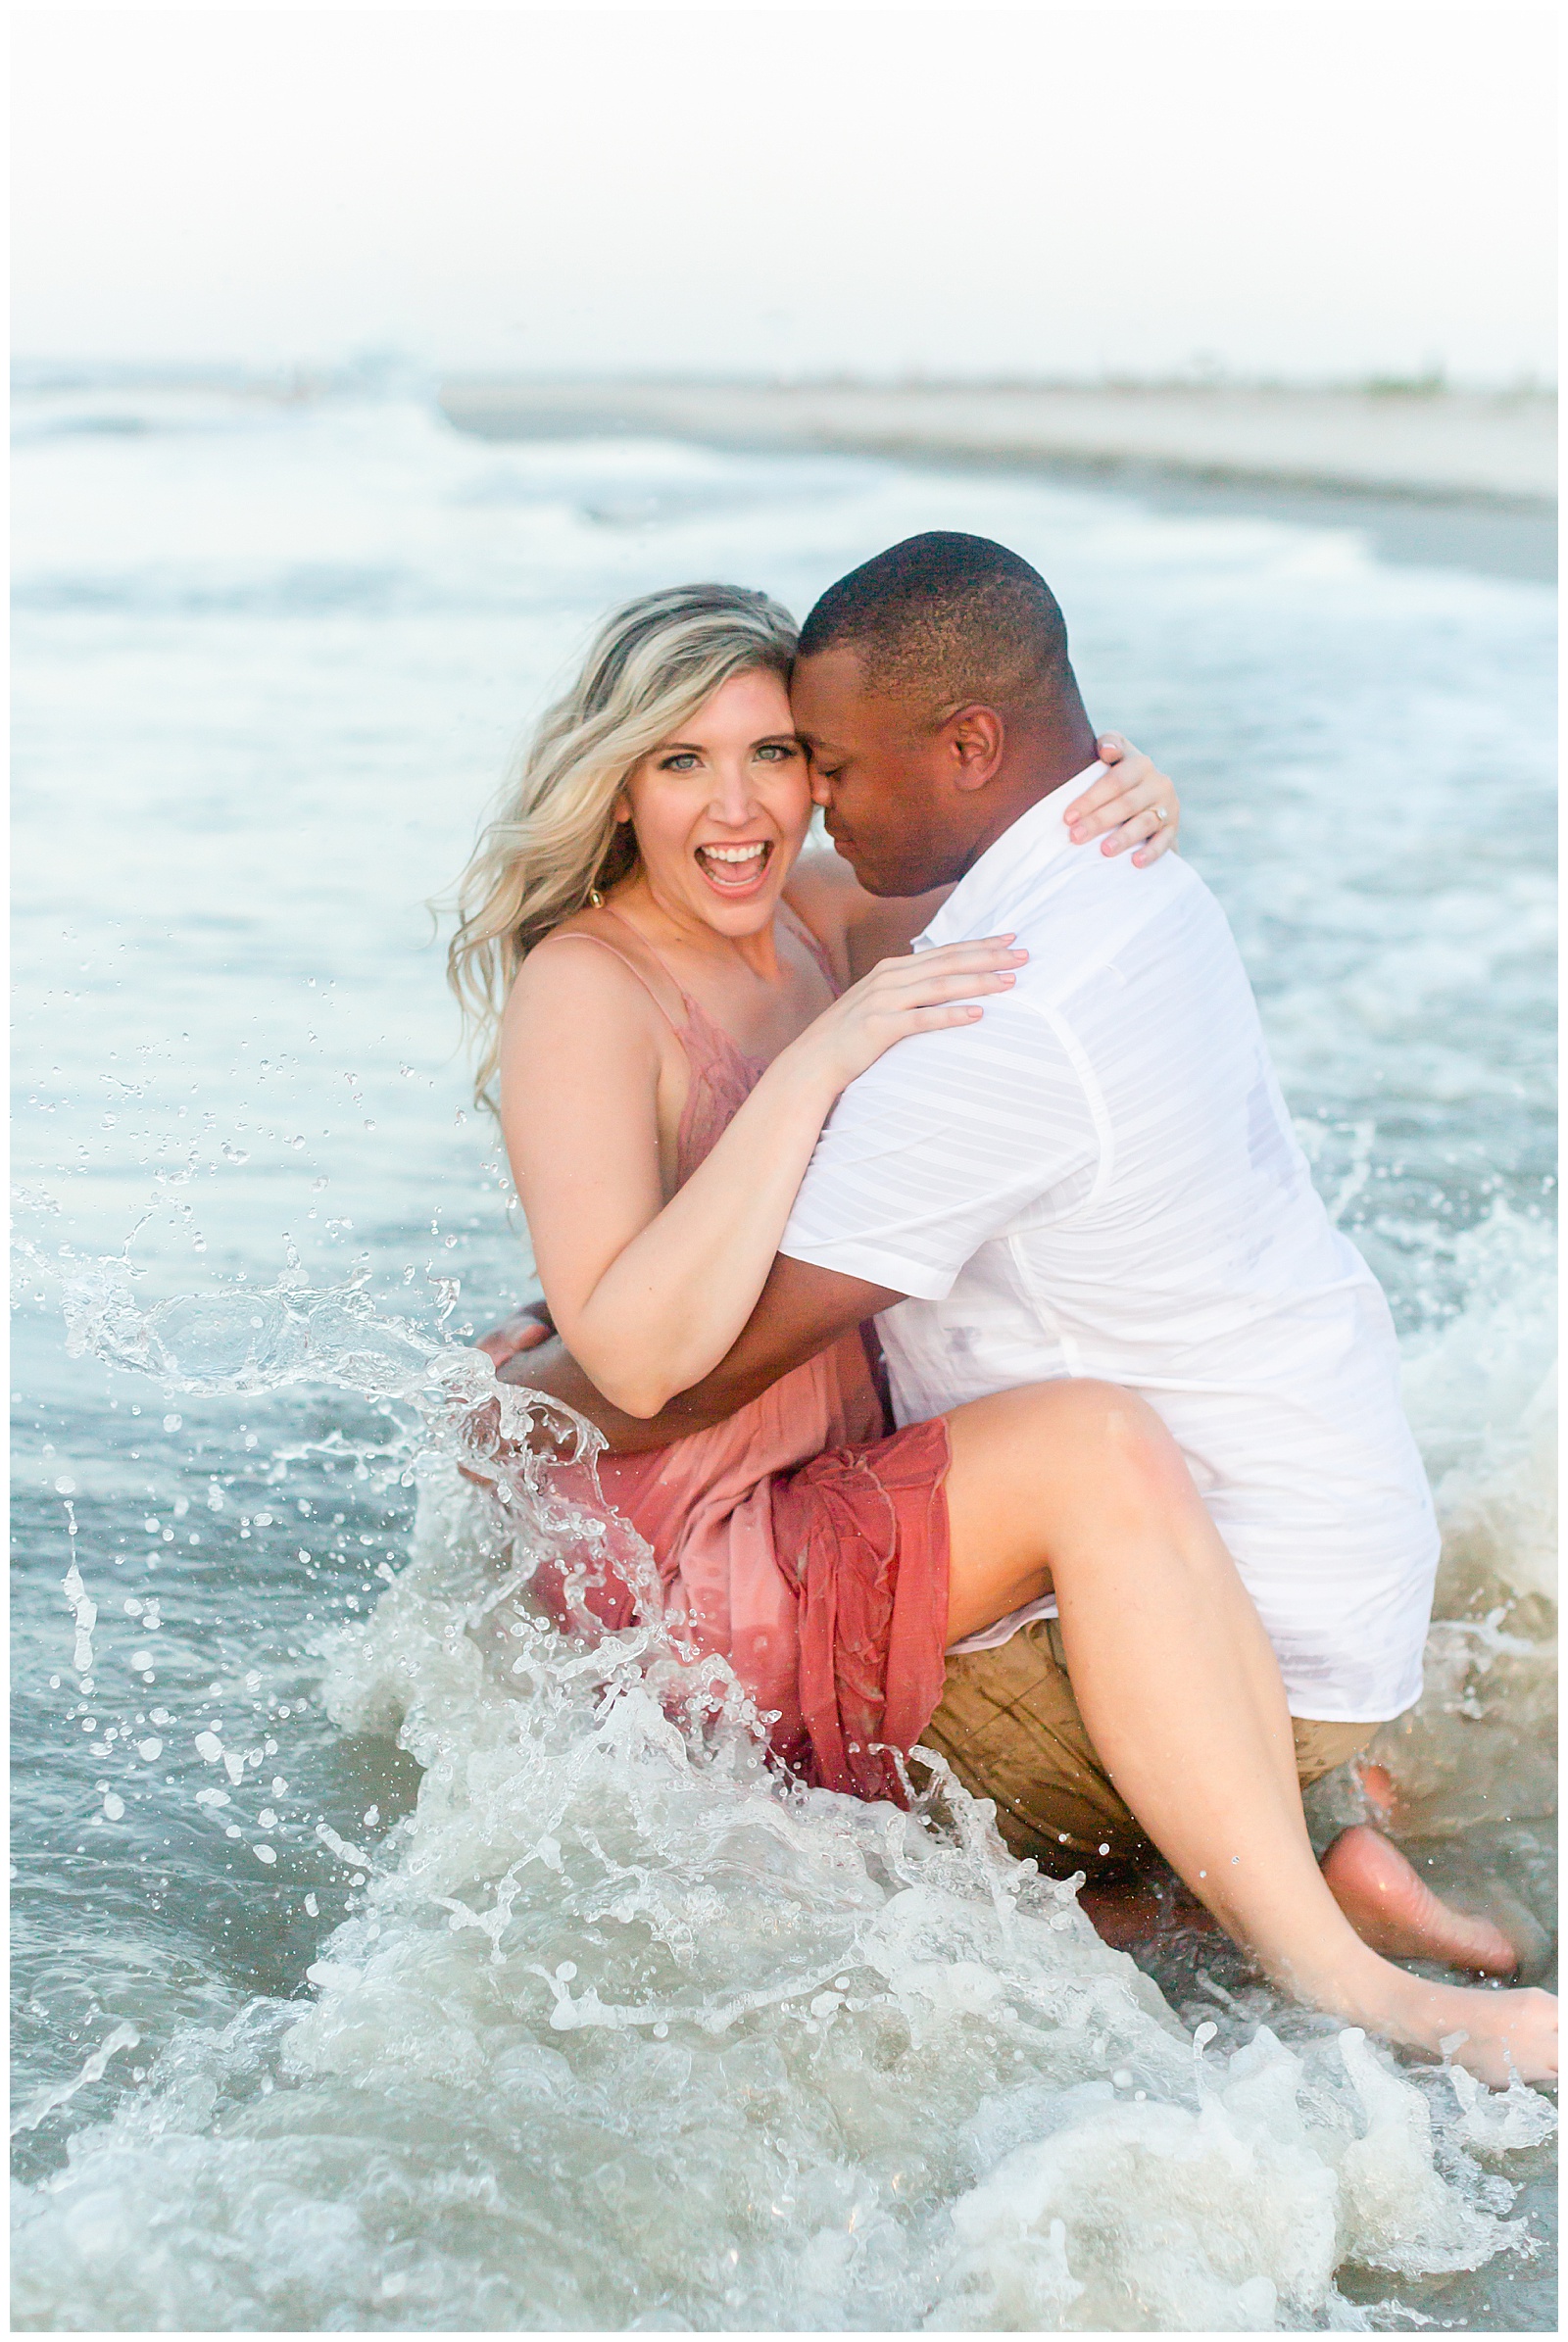 In the water engagement photography